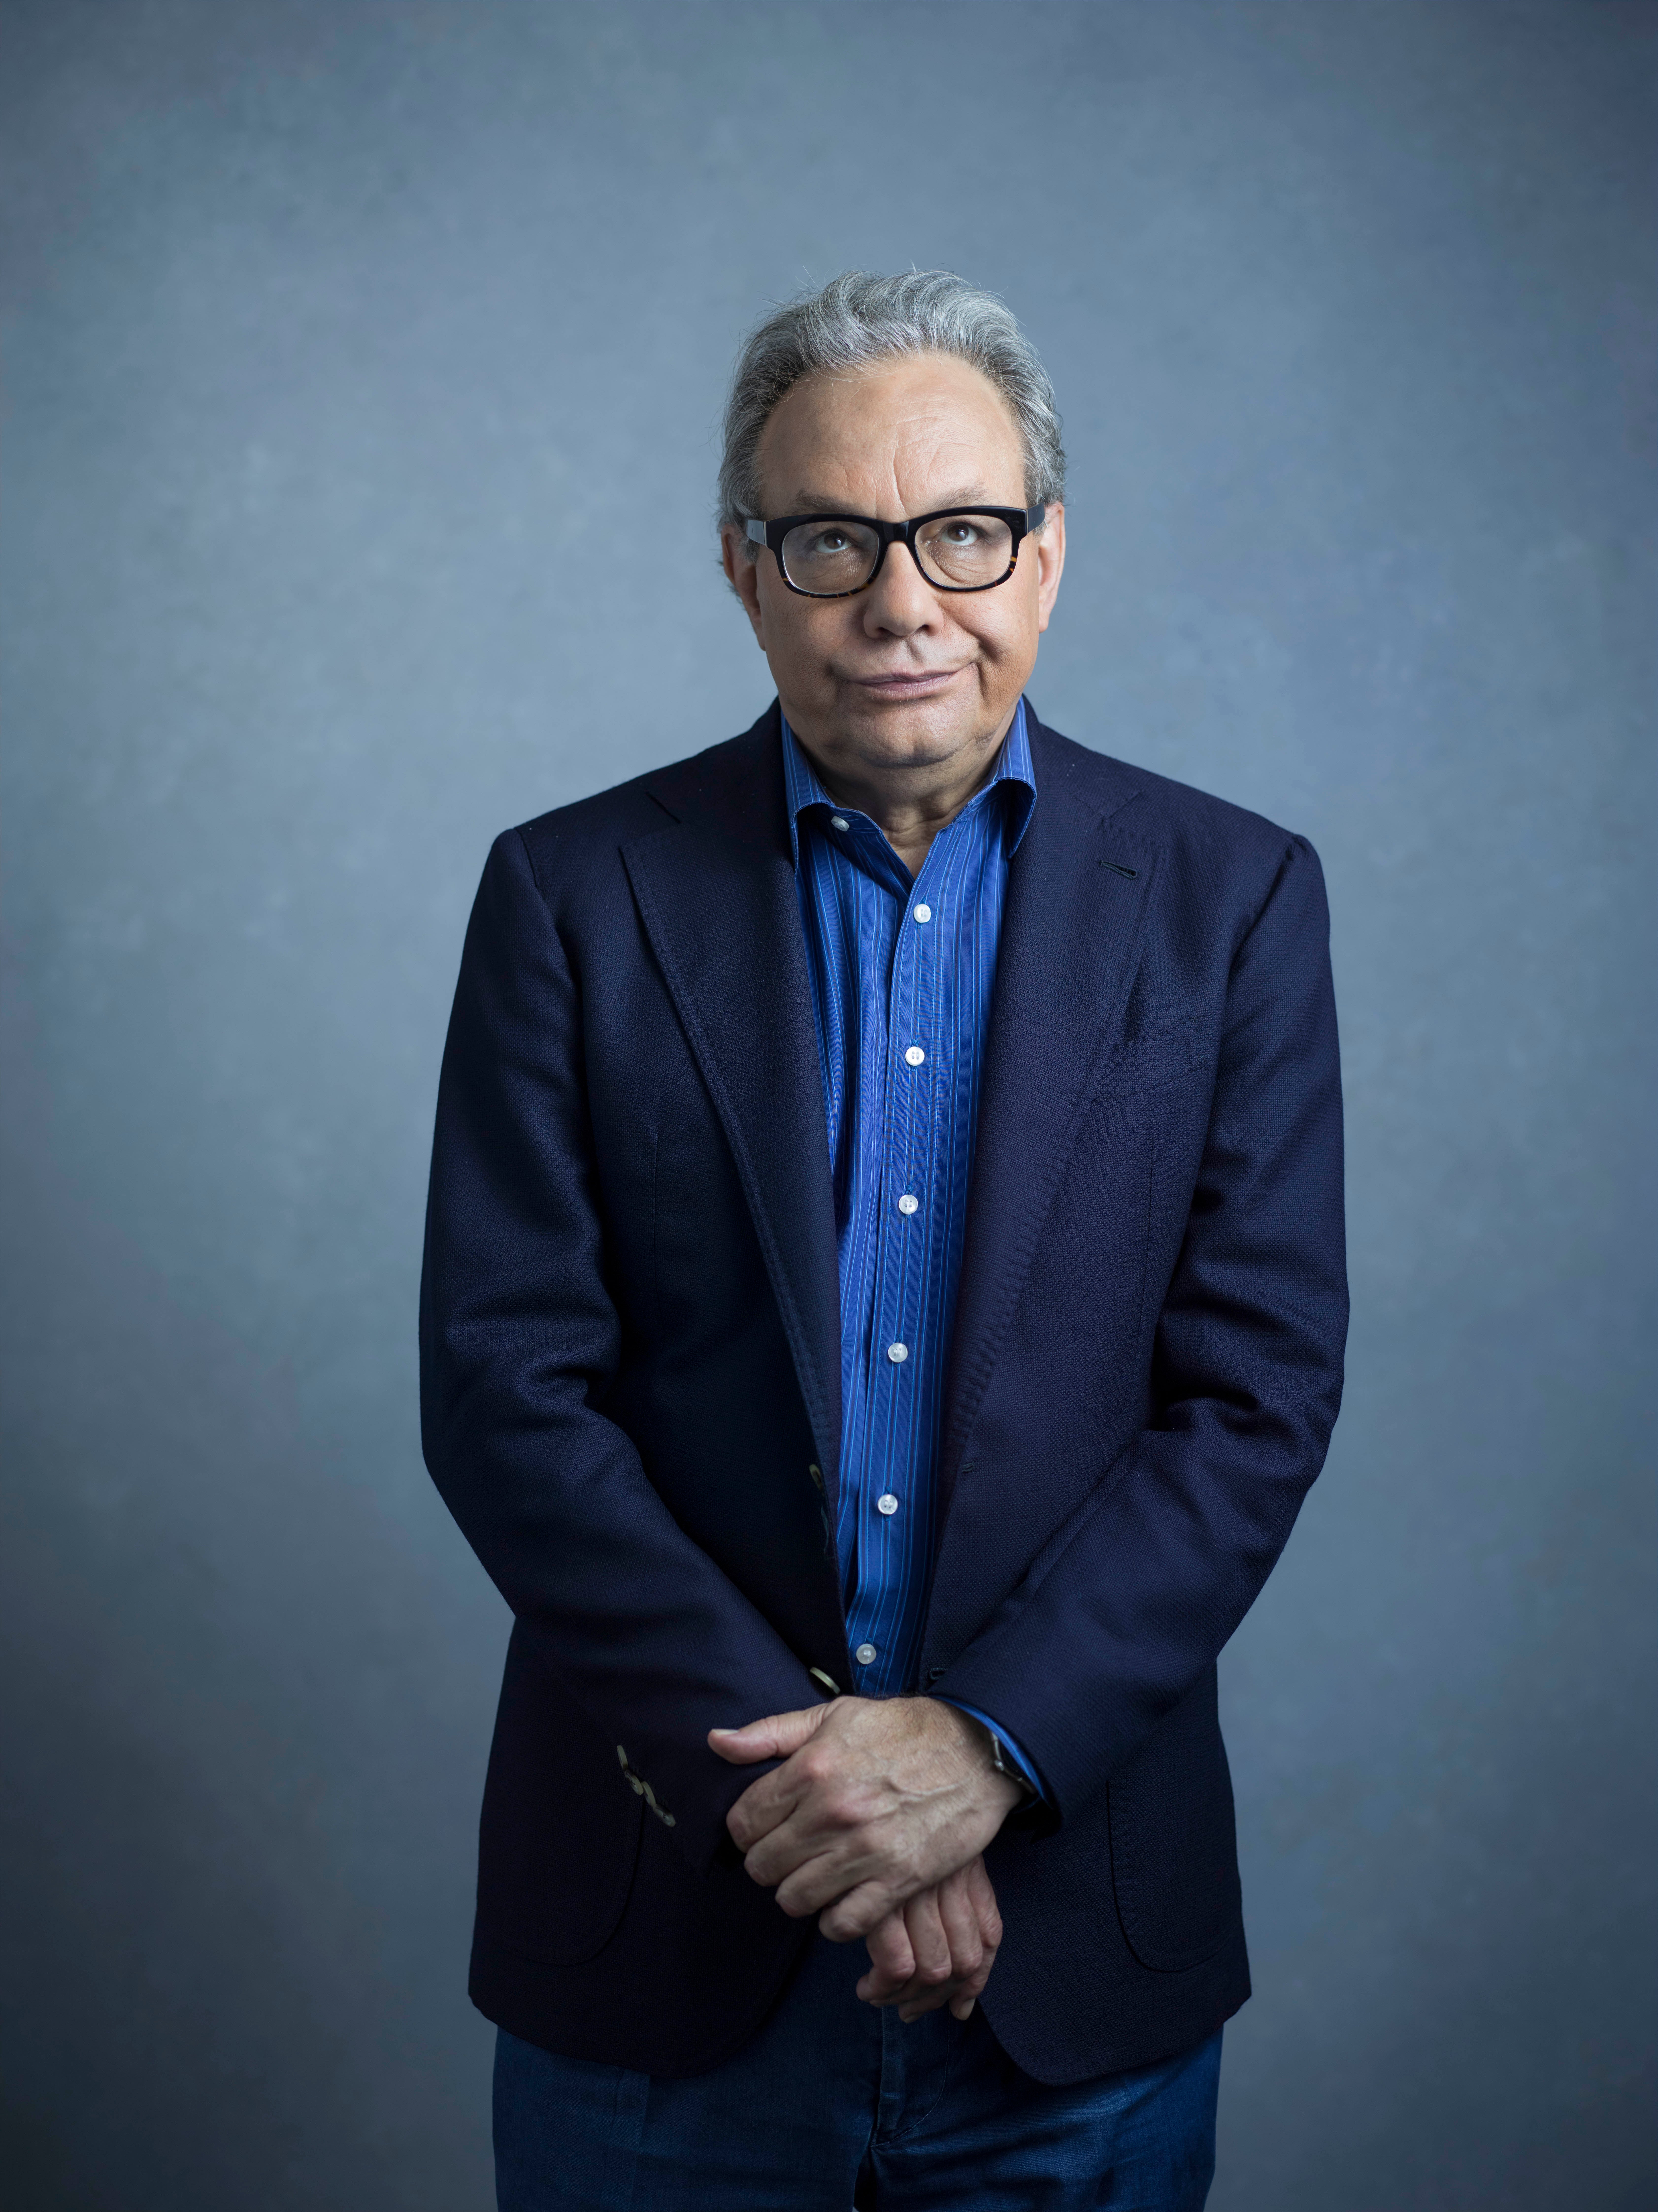 Lewis Black: Goodbye Yeller Brick Road, The Final Tour at Pabst Theater – Milwaukee, WI